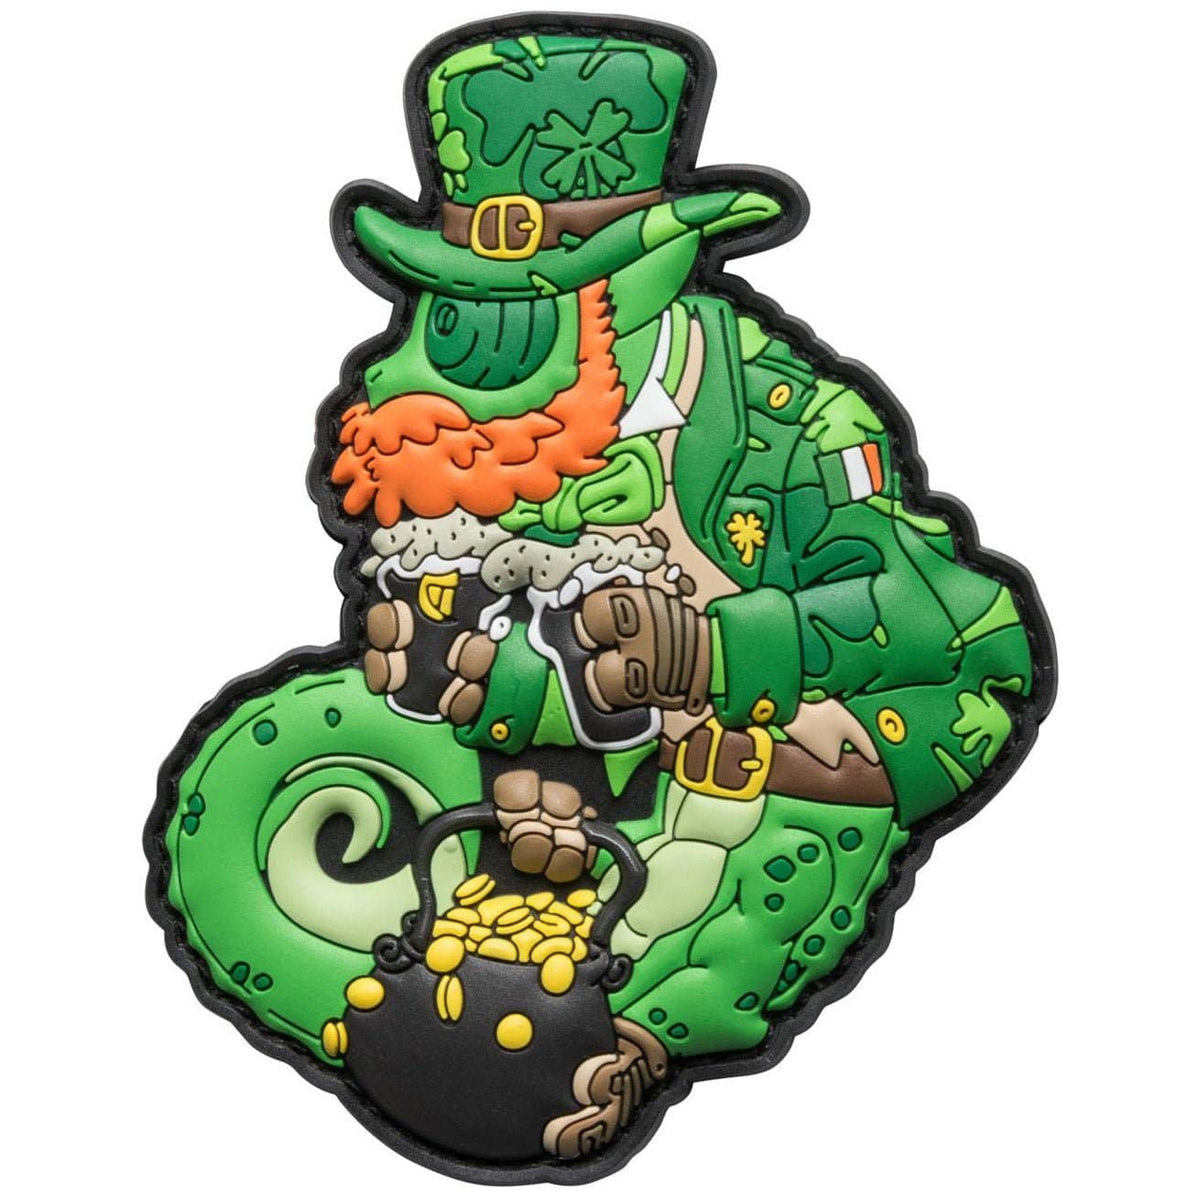 HELIKON-TEX CHAMELEON ST. PADDY PVC PATCH - The Morale Patches